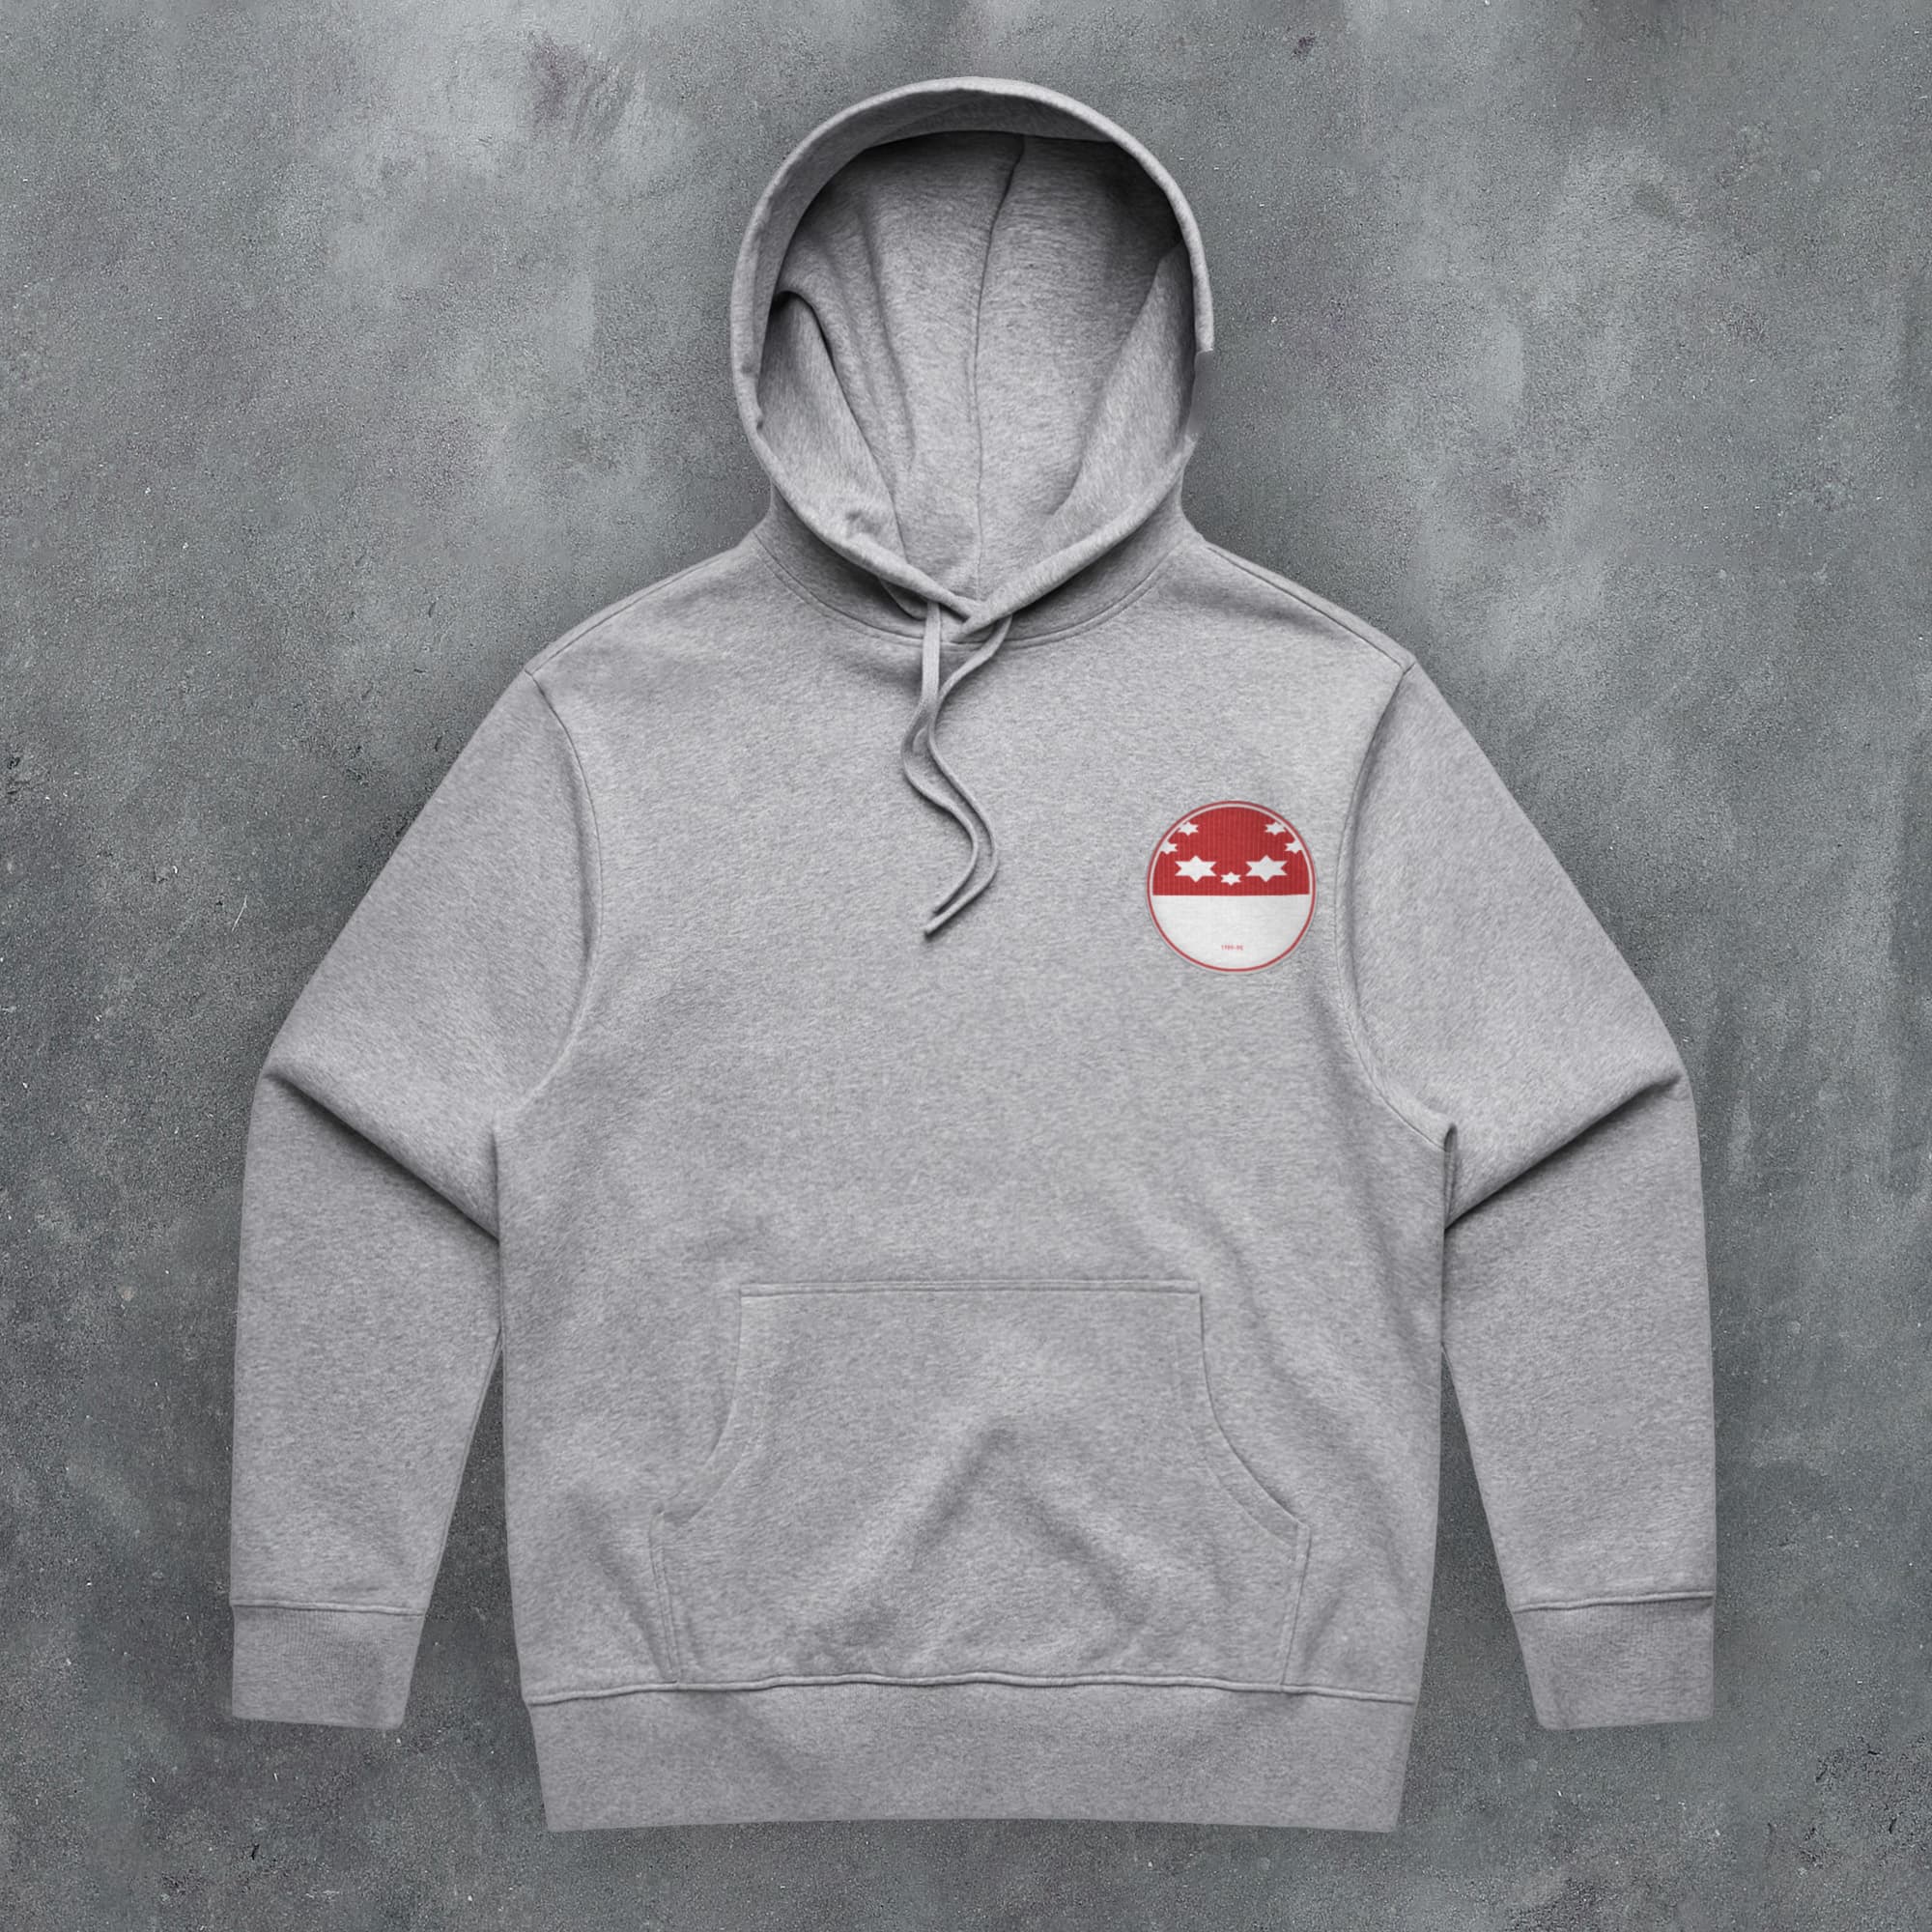 a grey hoodie with a mushroom patch on it